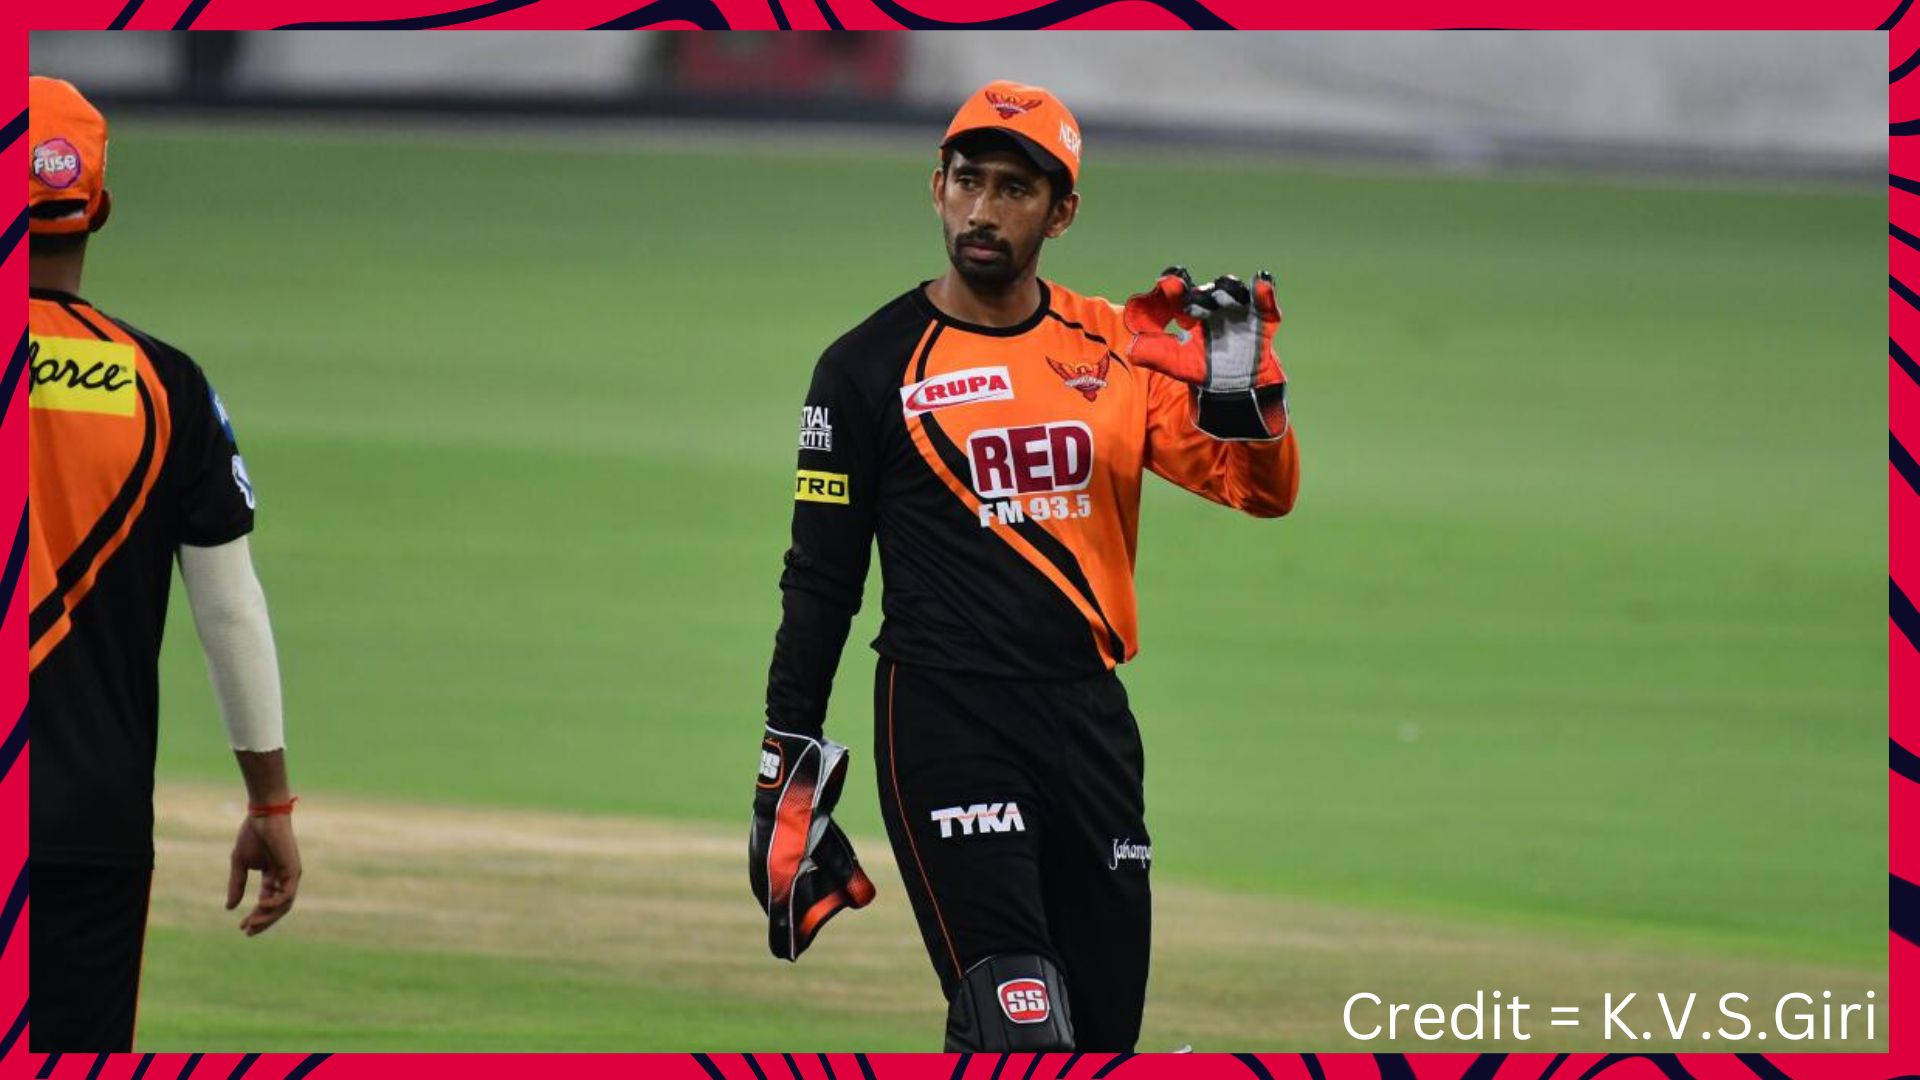 Wriddhiman Saha will be paid 1.9 crore rupees, which is equivalent to approximately $350k for playing in IPL 2023.